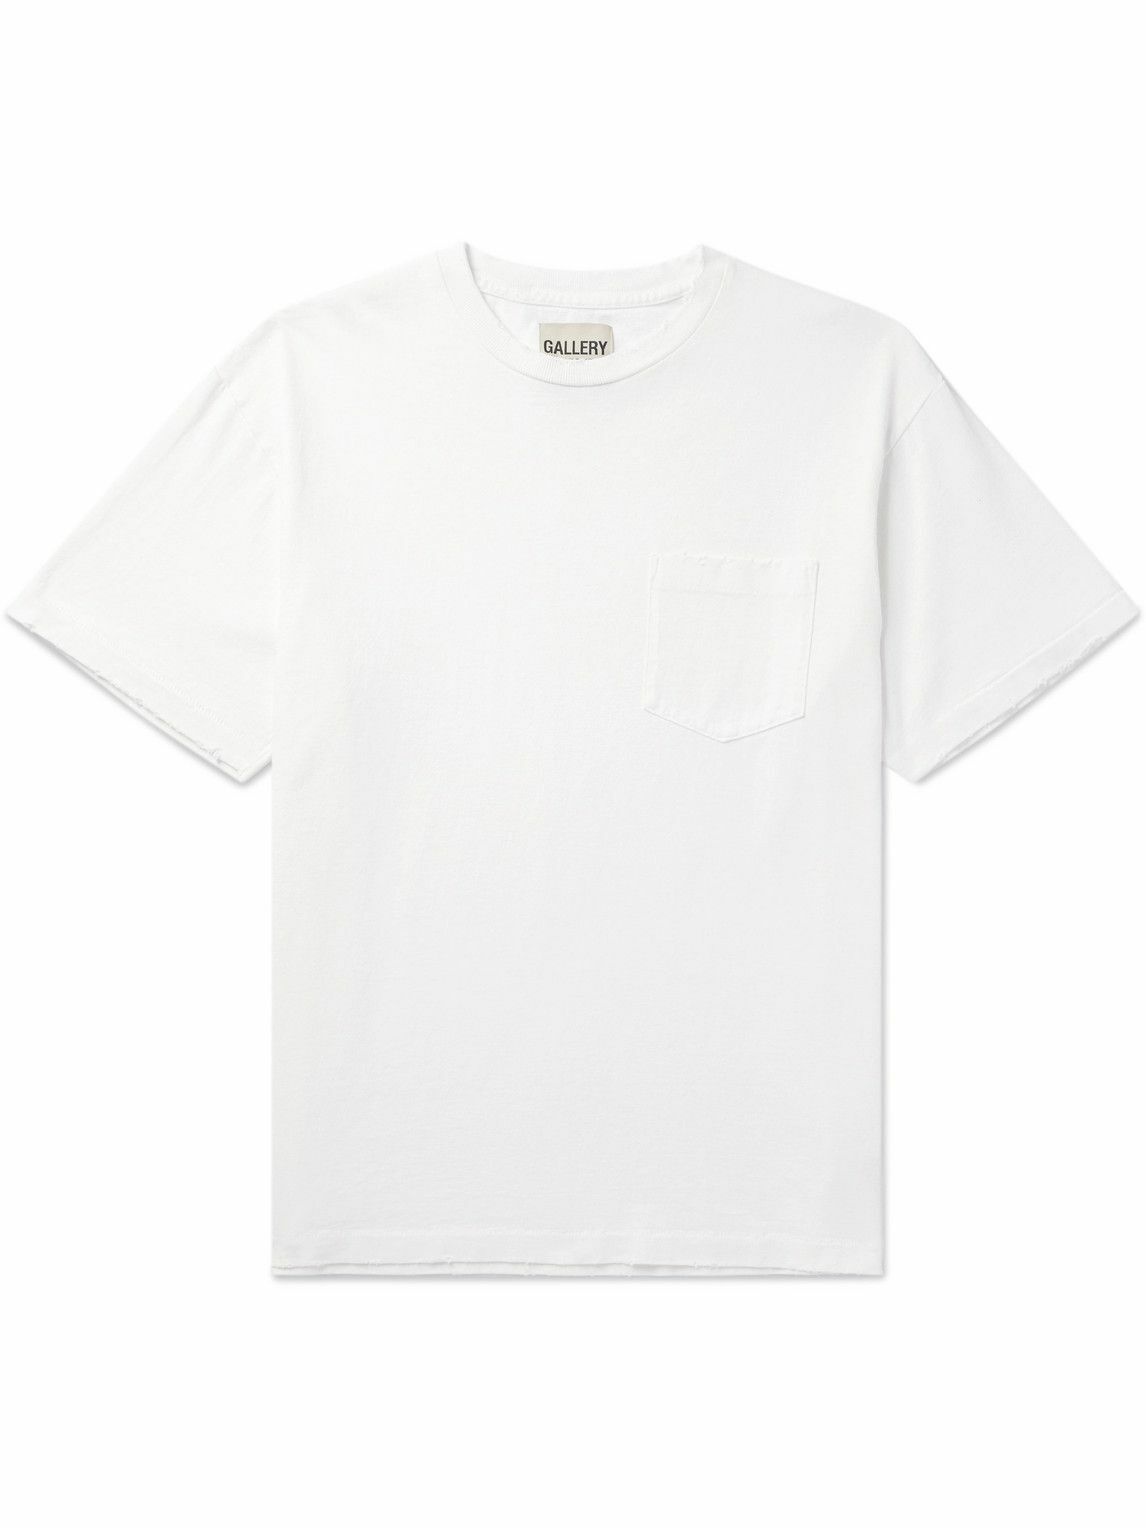 Gallery Dept. - Distressed Cotton-Jersey T-Shirt - White Gallery Dept.